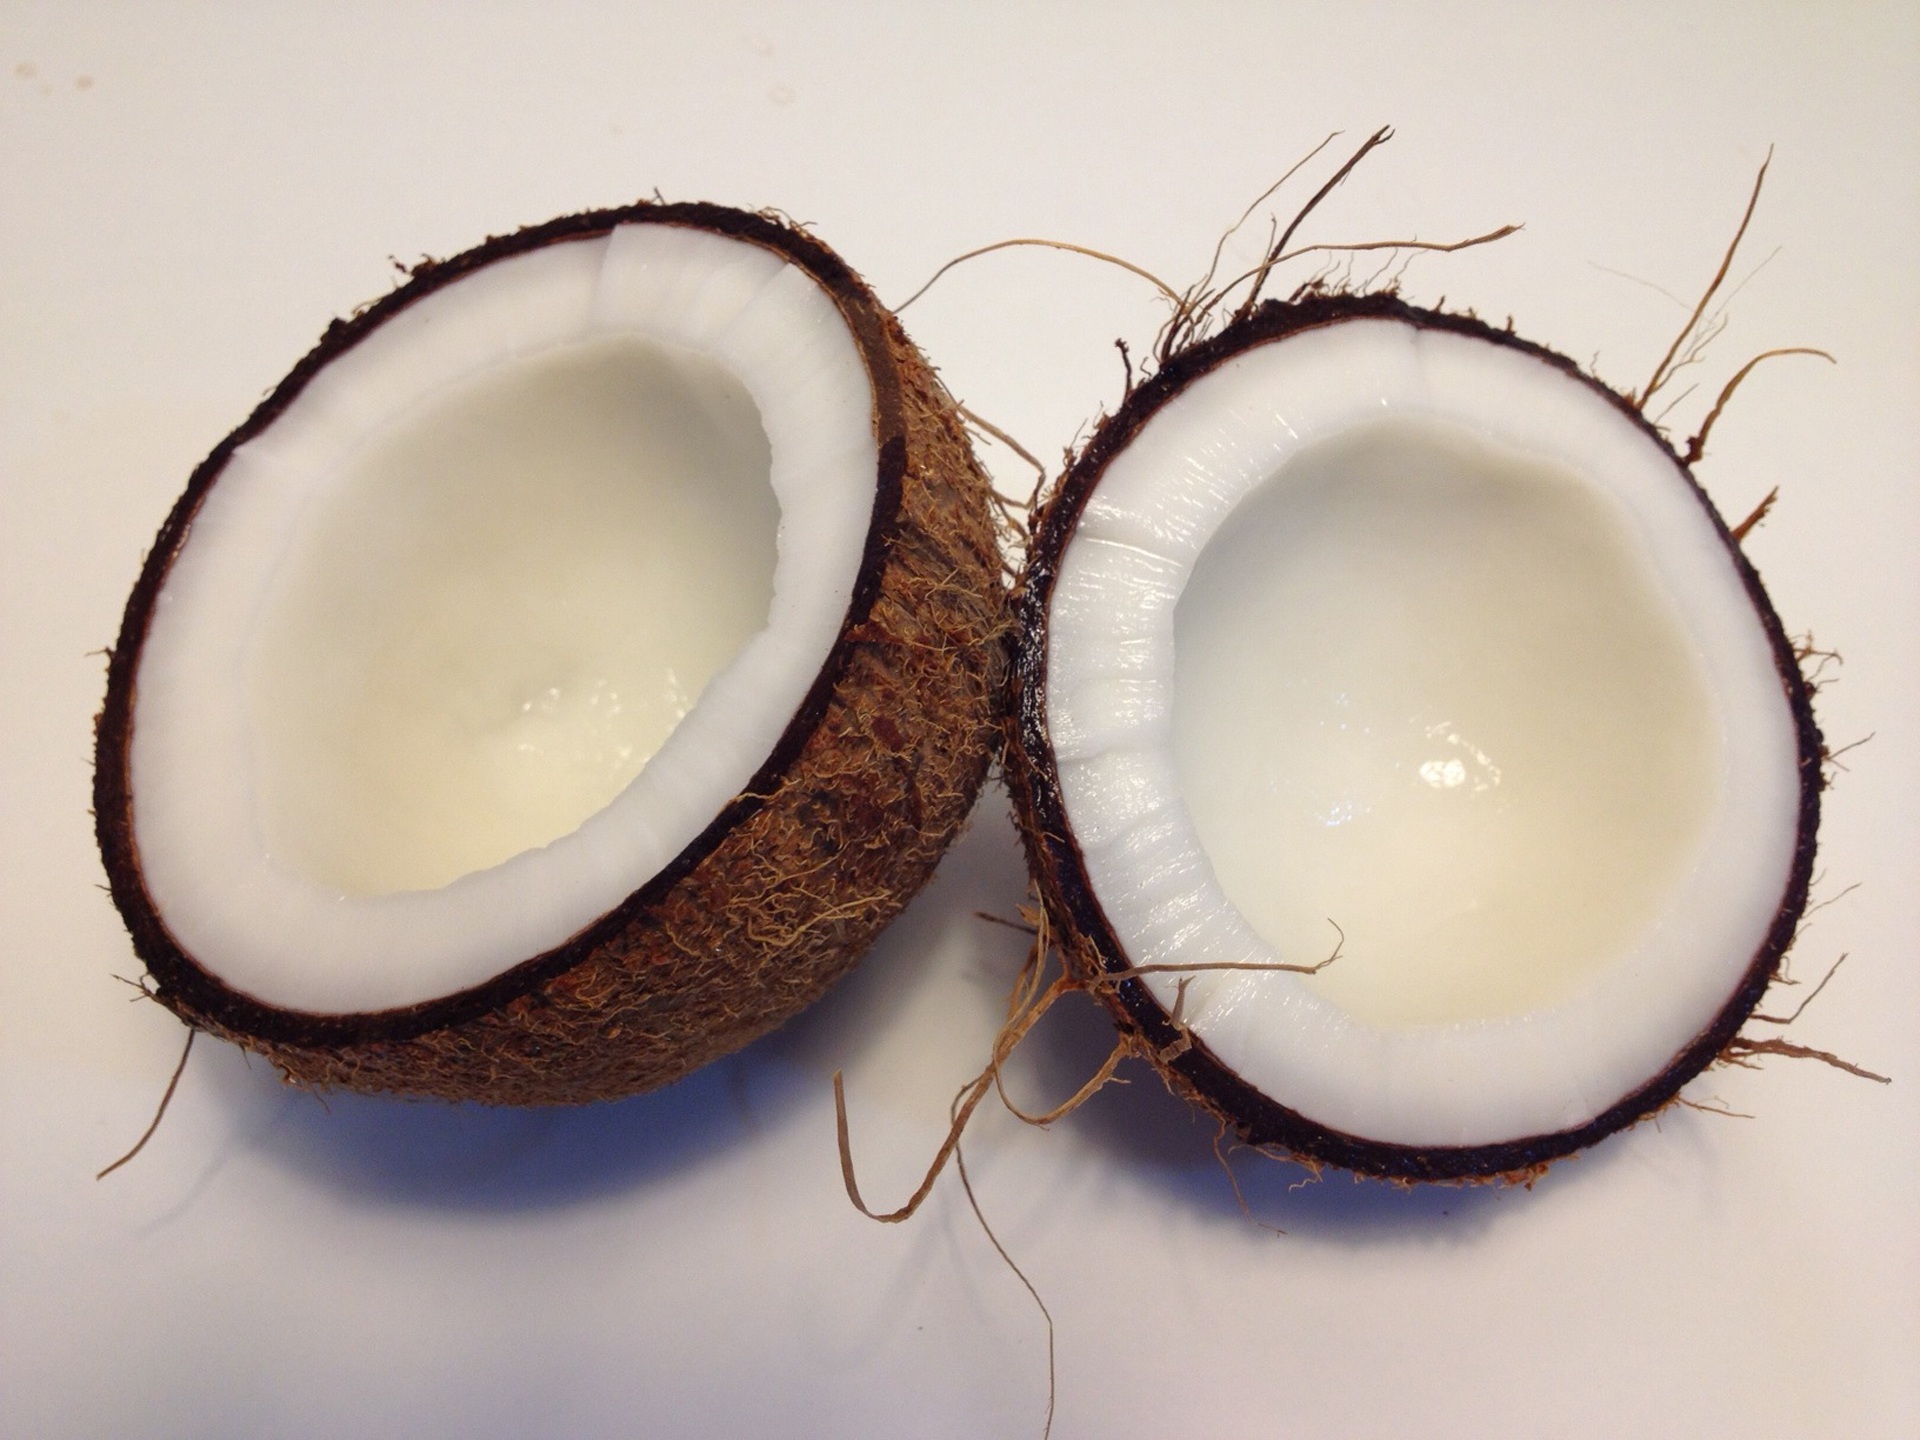 Why Coconut Oil is Good For Our Health